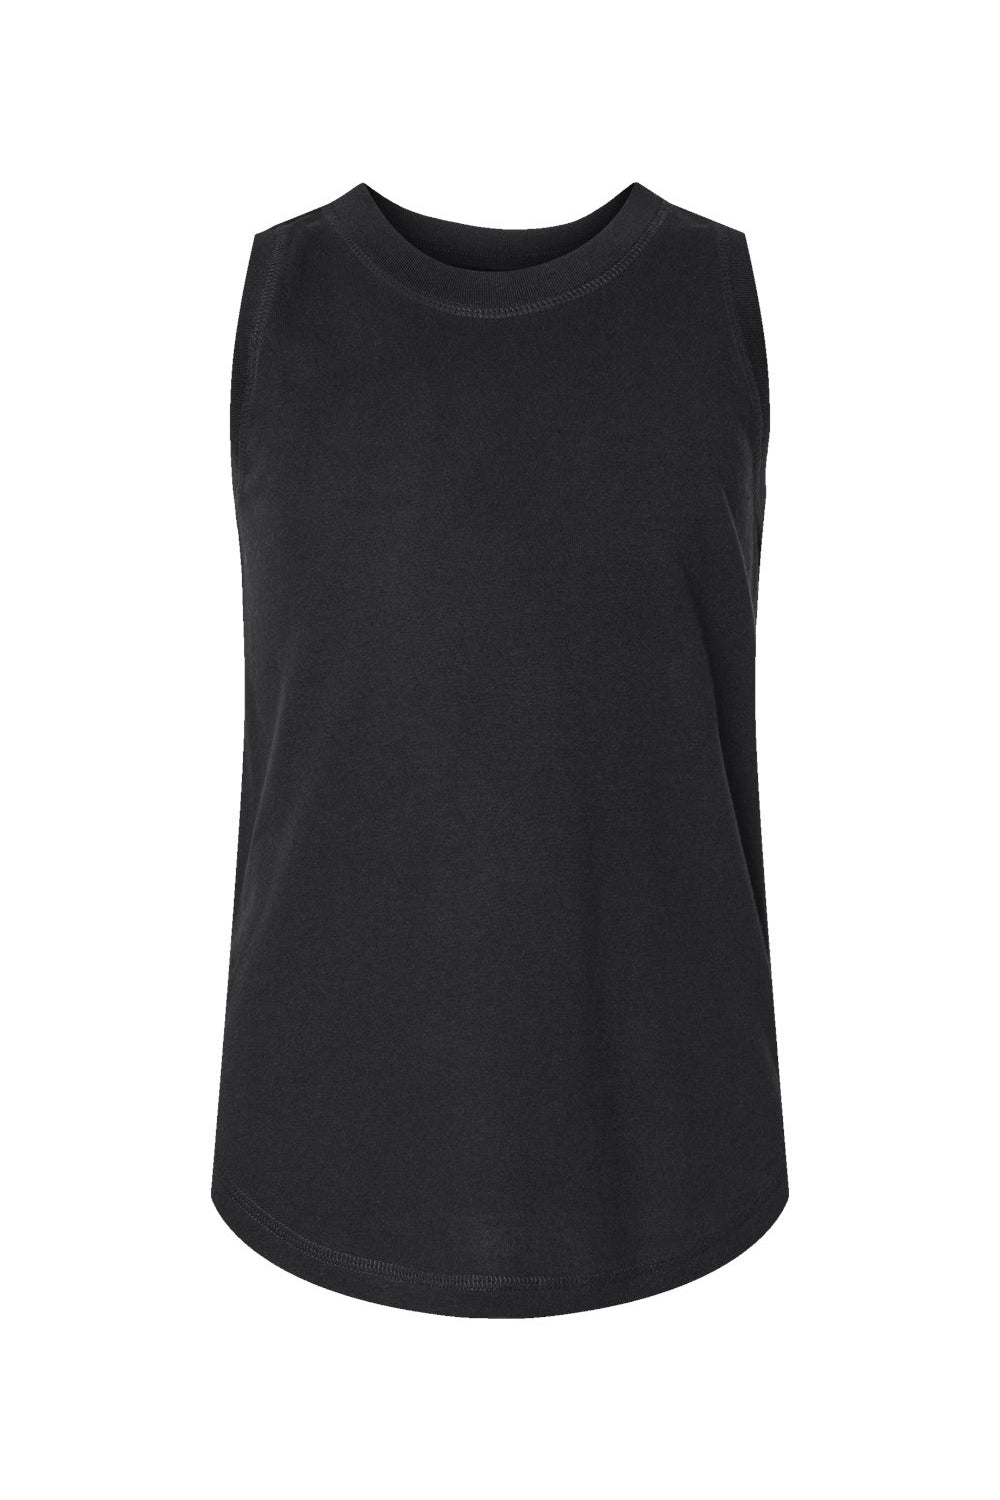 LAT 2692 Youth Girls Relaxed Fine Jersey Tank Taop Black Flat Front